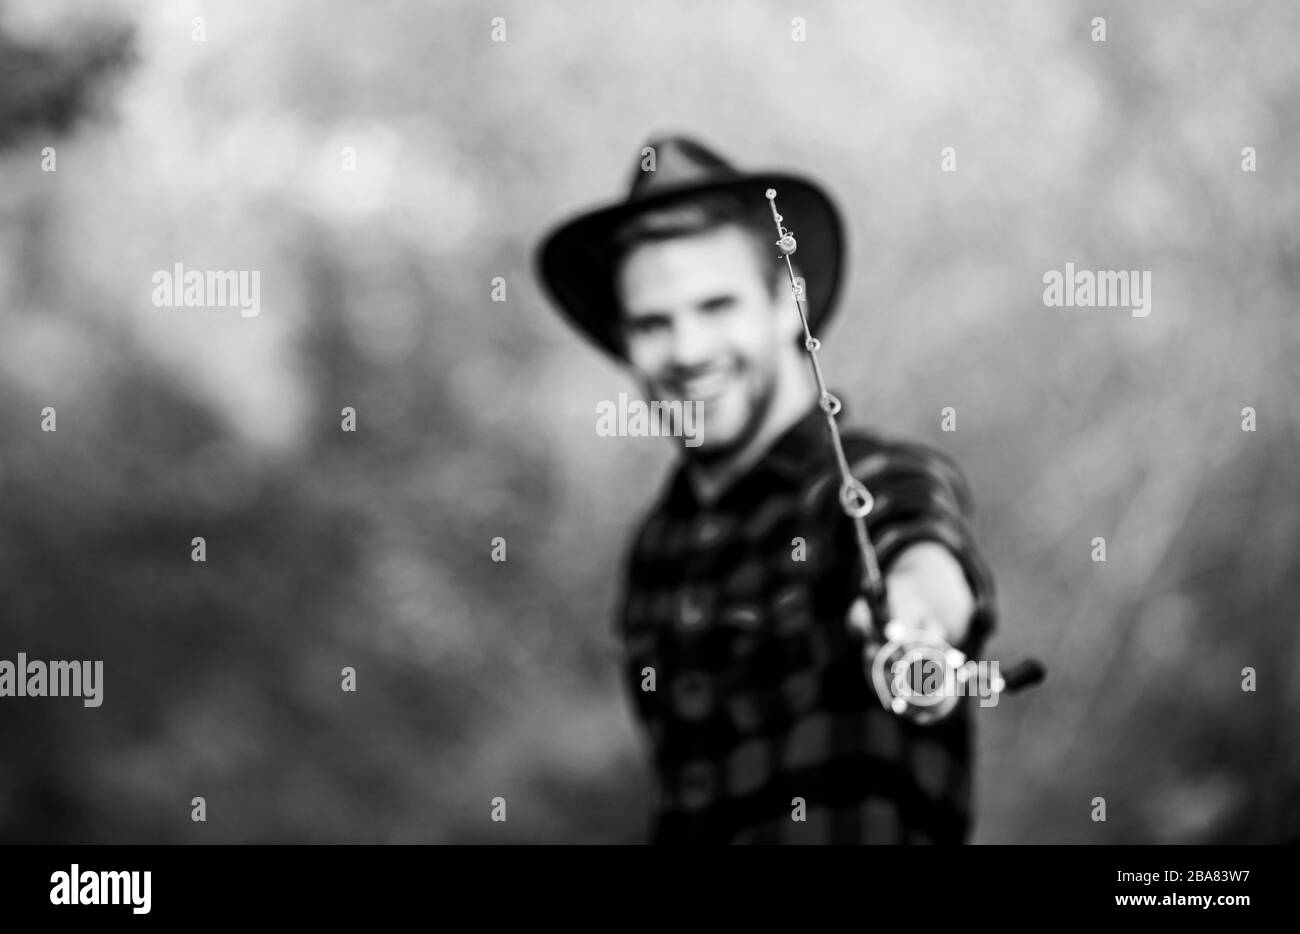 Fisherman in cowboy hat Black and White Stock Photos & Images - Alamy